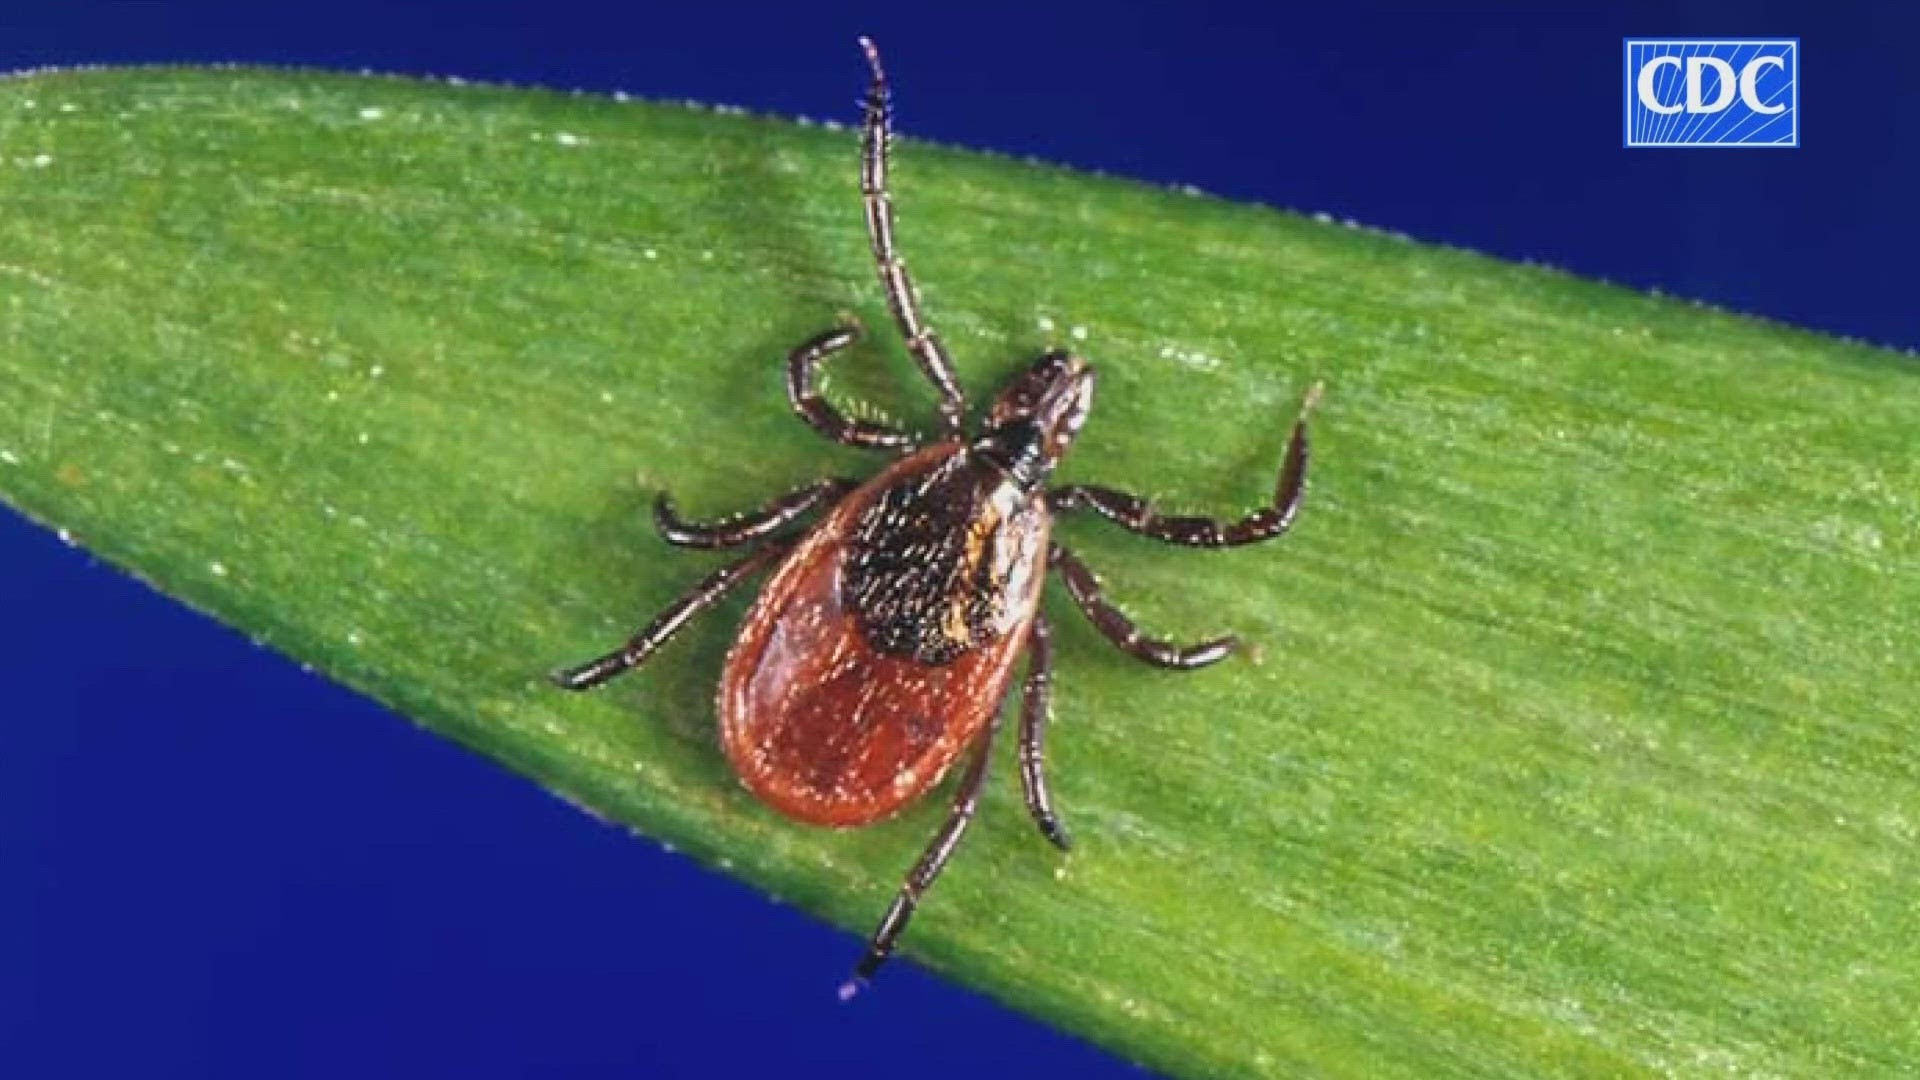 If a tick has been on you for longer than 36 hours, call your healthcare provider.